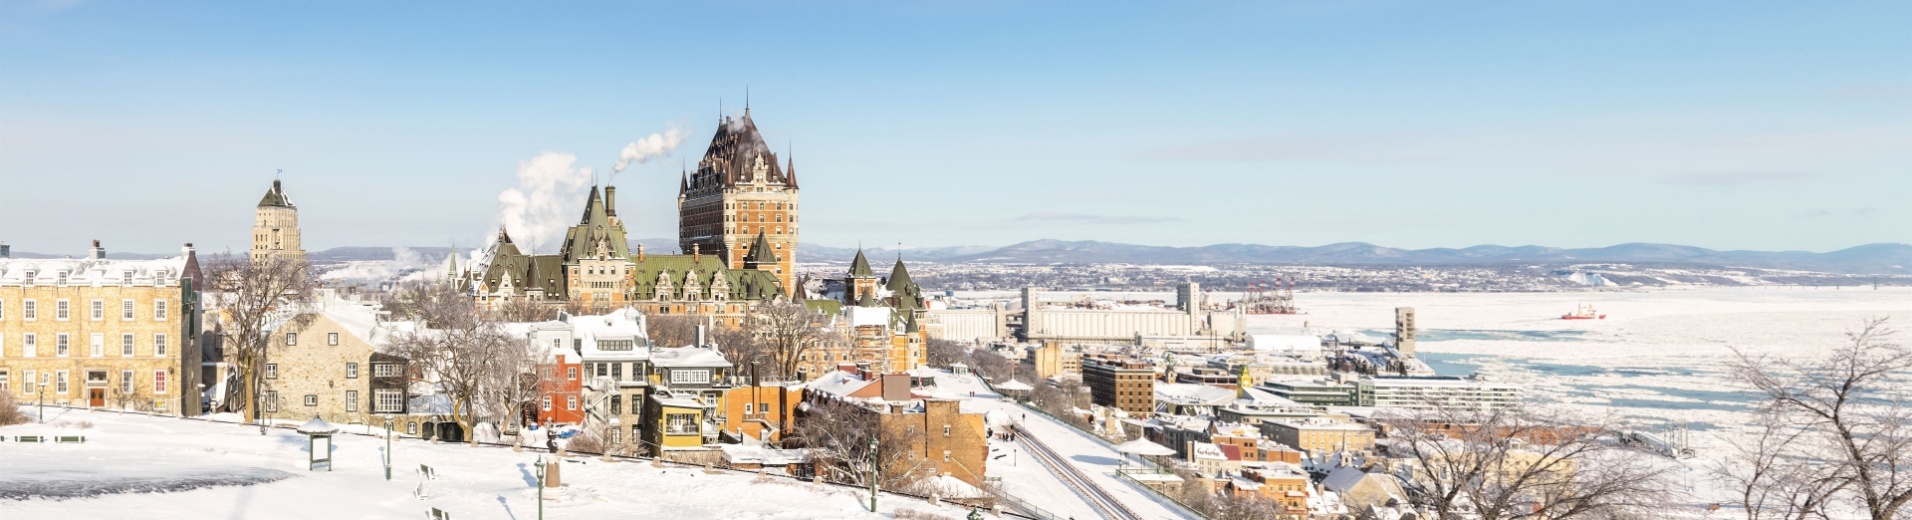 chateau-frontenac-neige-hiver-canada